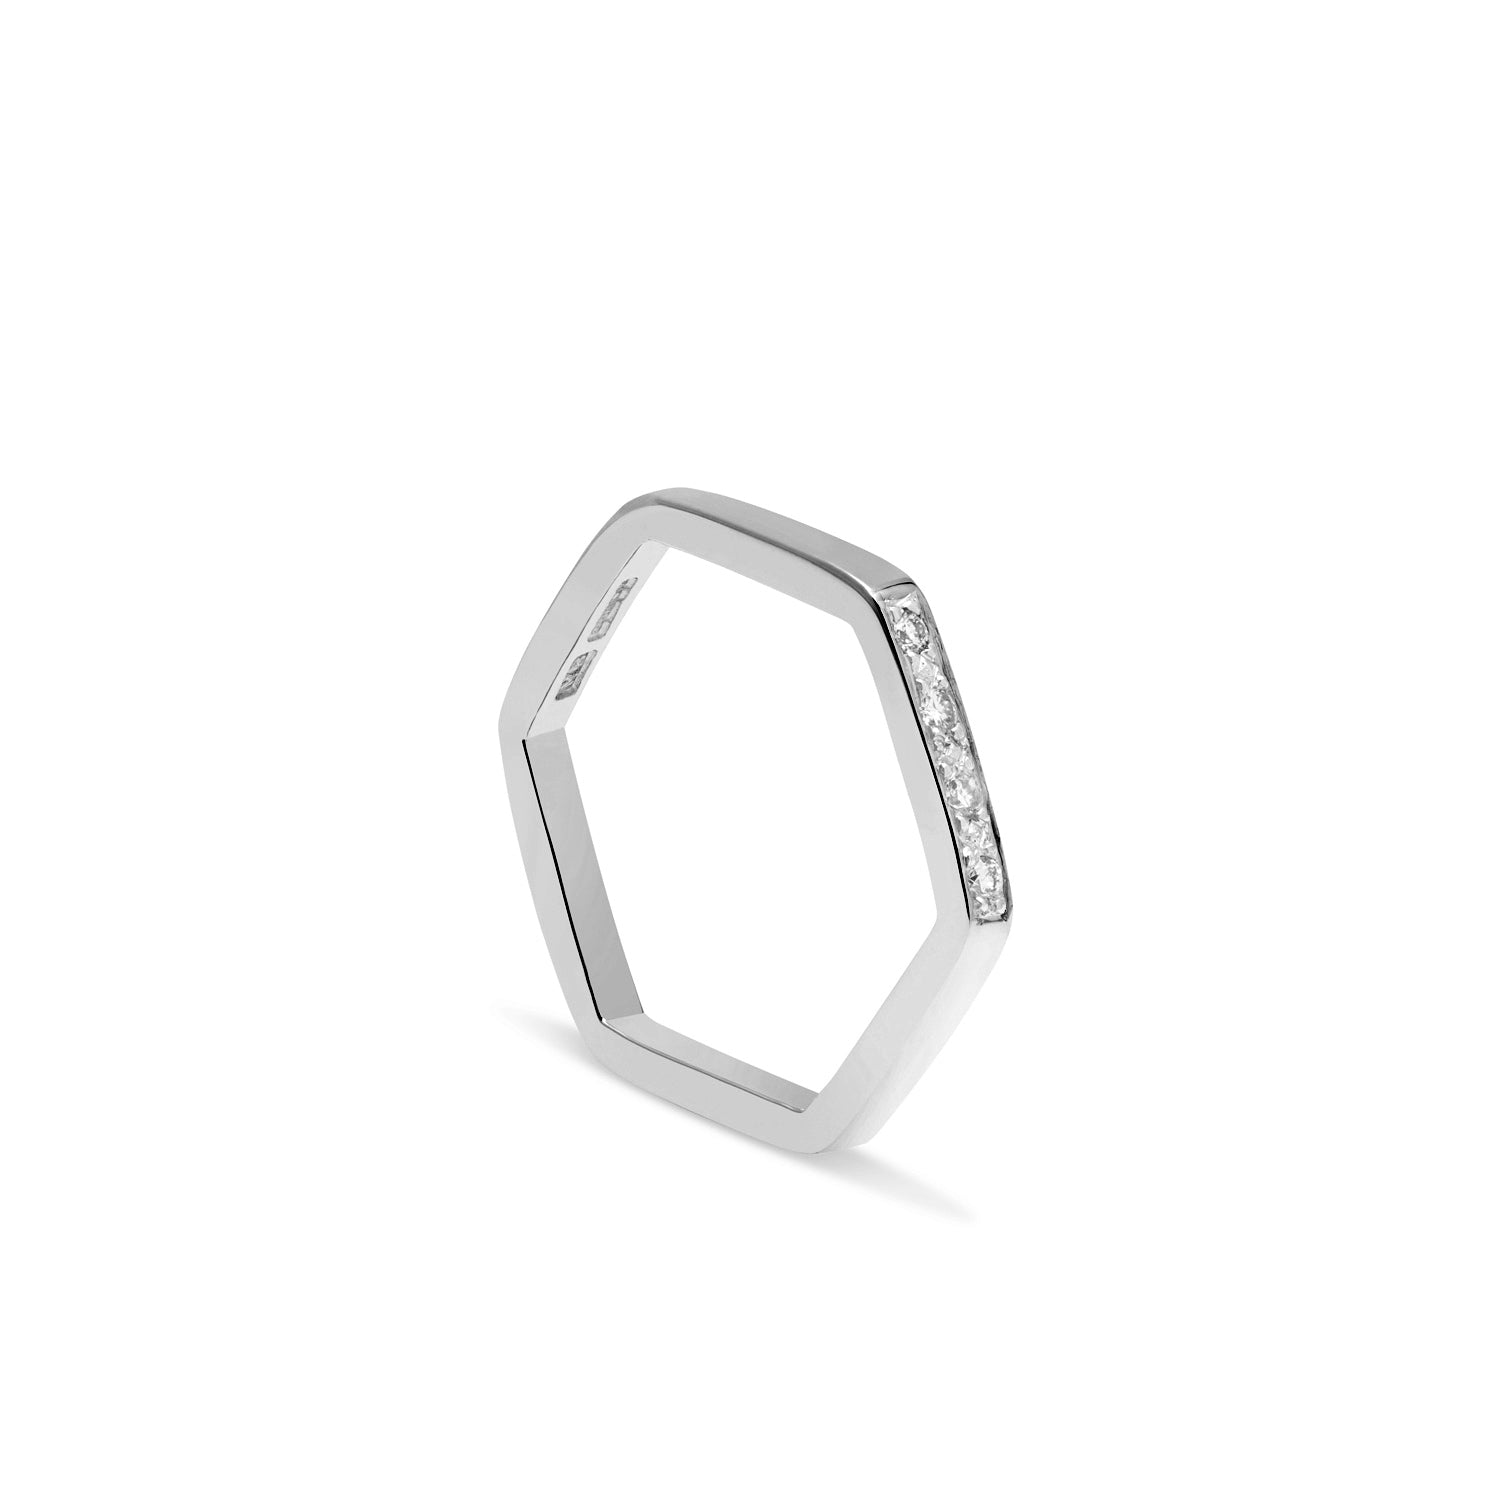 Hexagon Ring with Diamonds / 1 Side - 18k White Gold